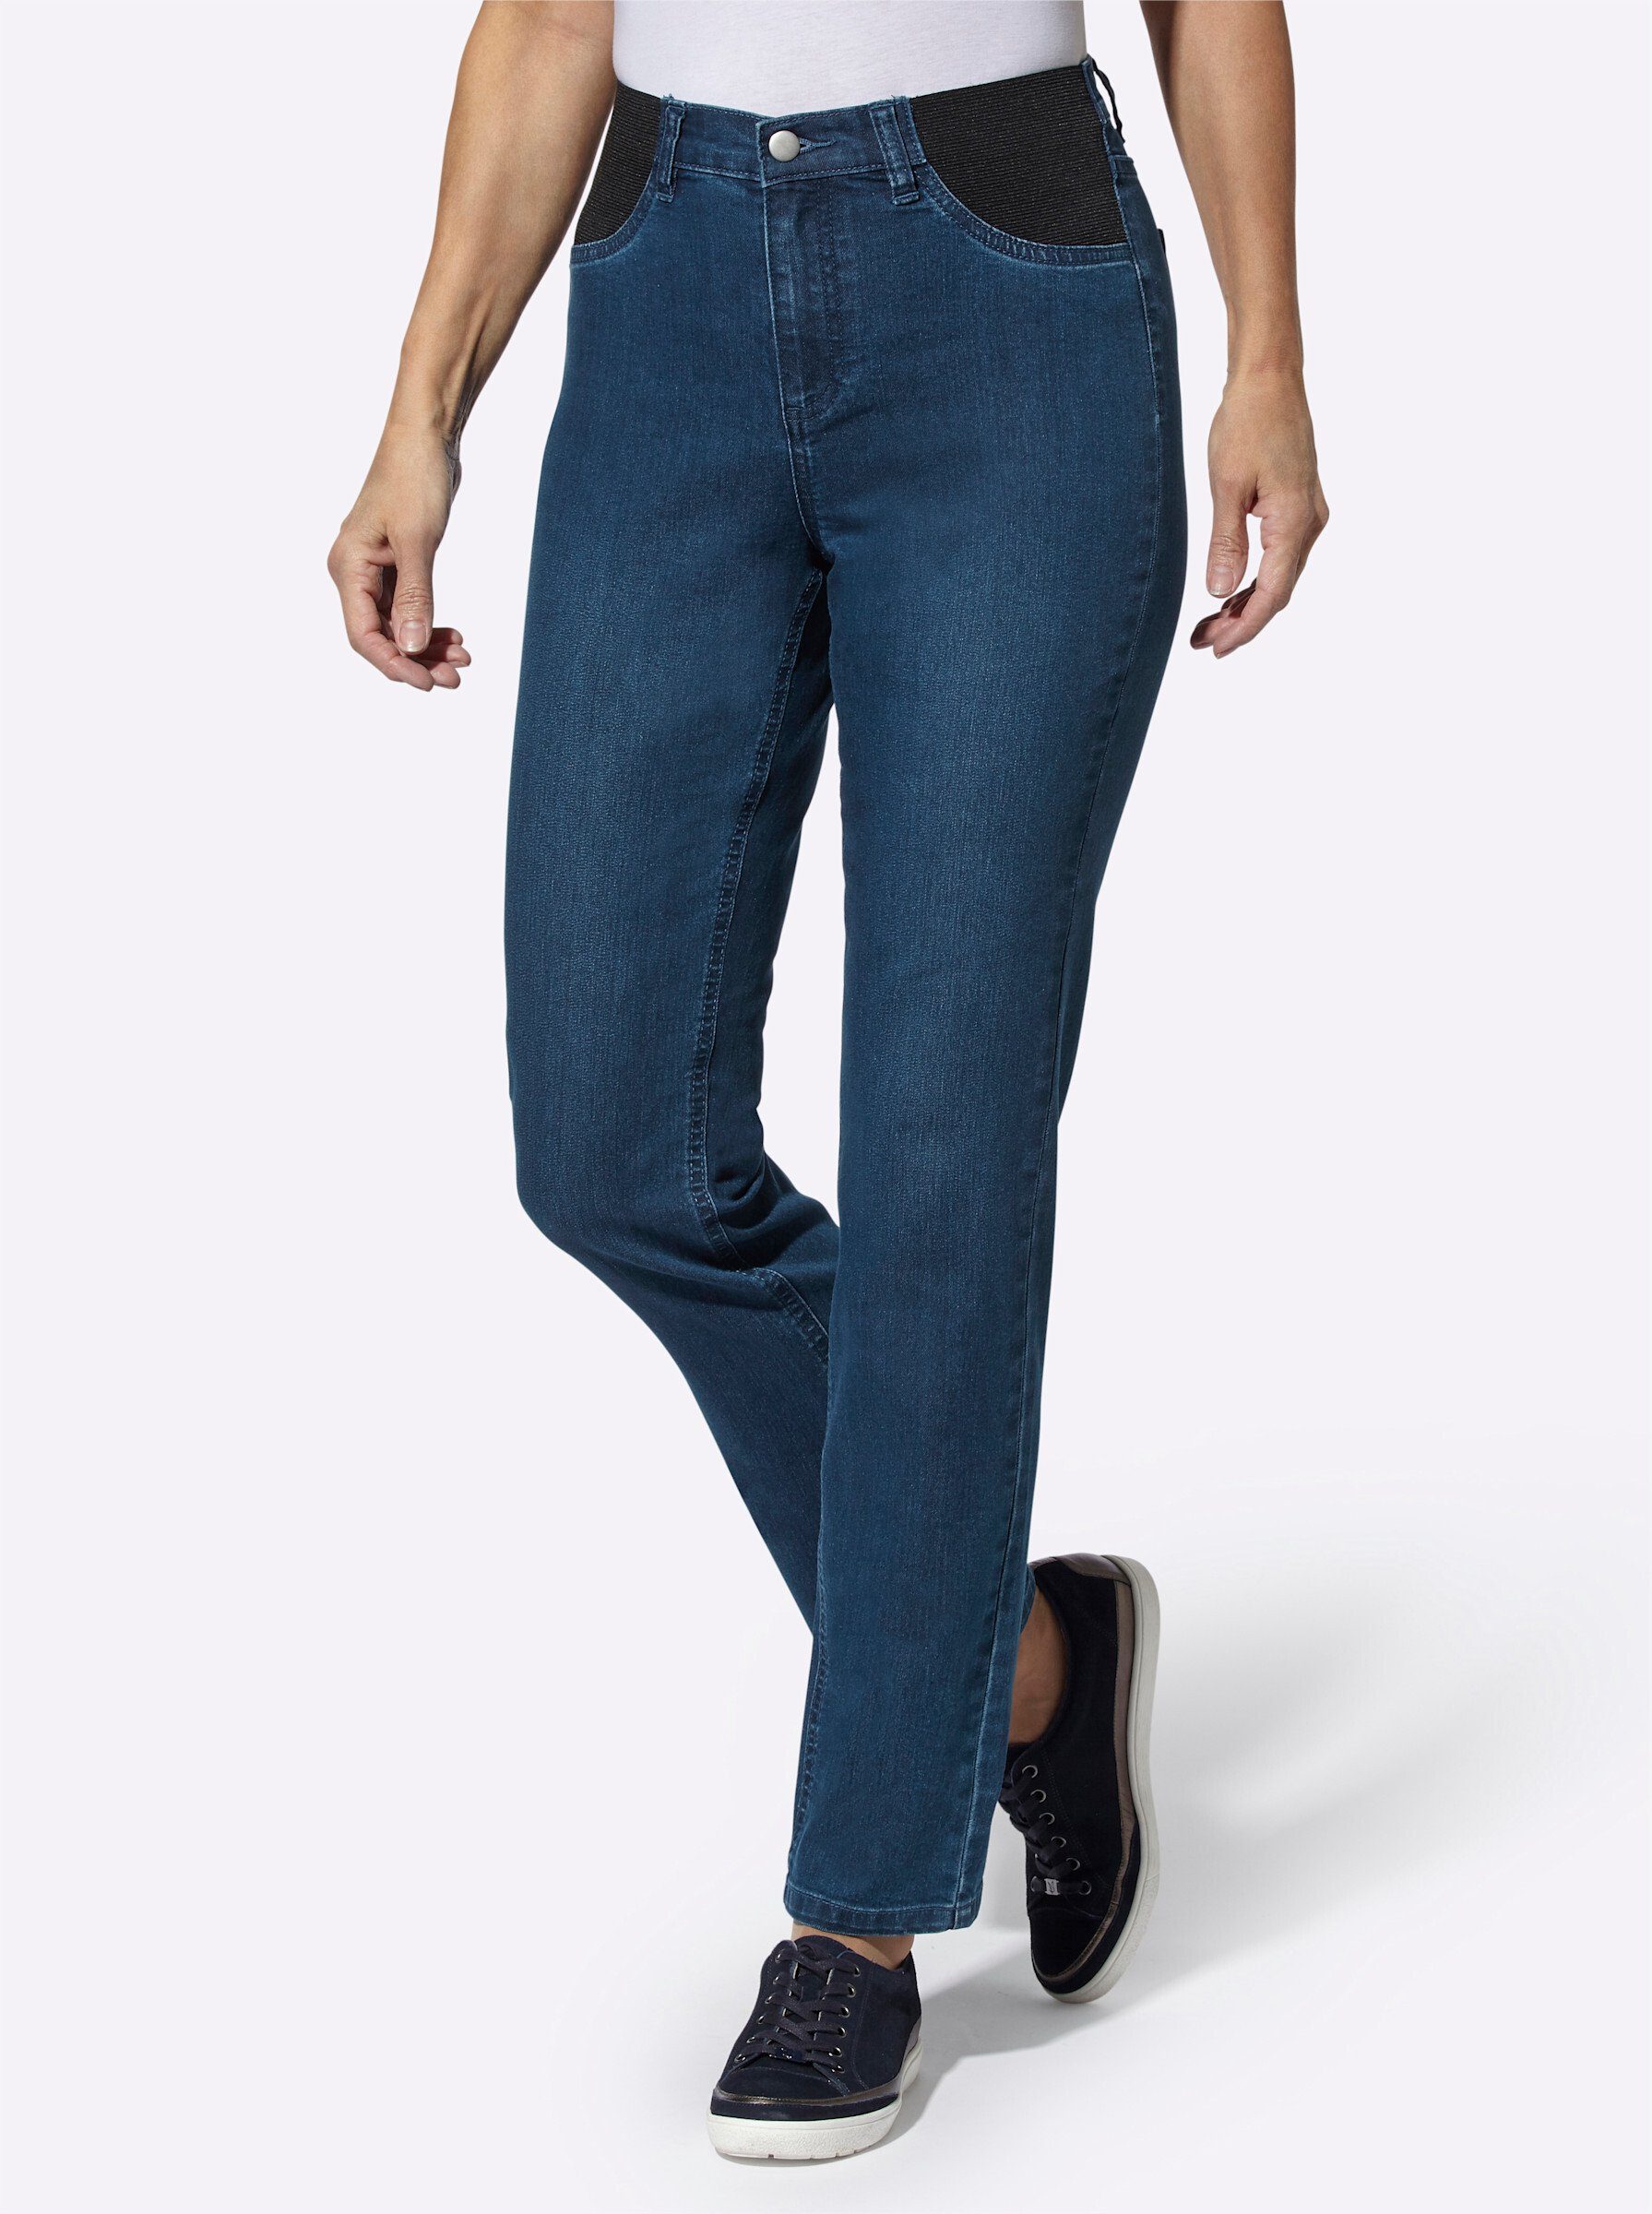 an! Bequeme Jeans blue-stone-washed Sieh